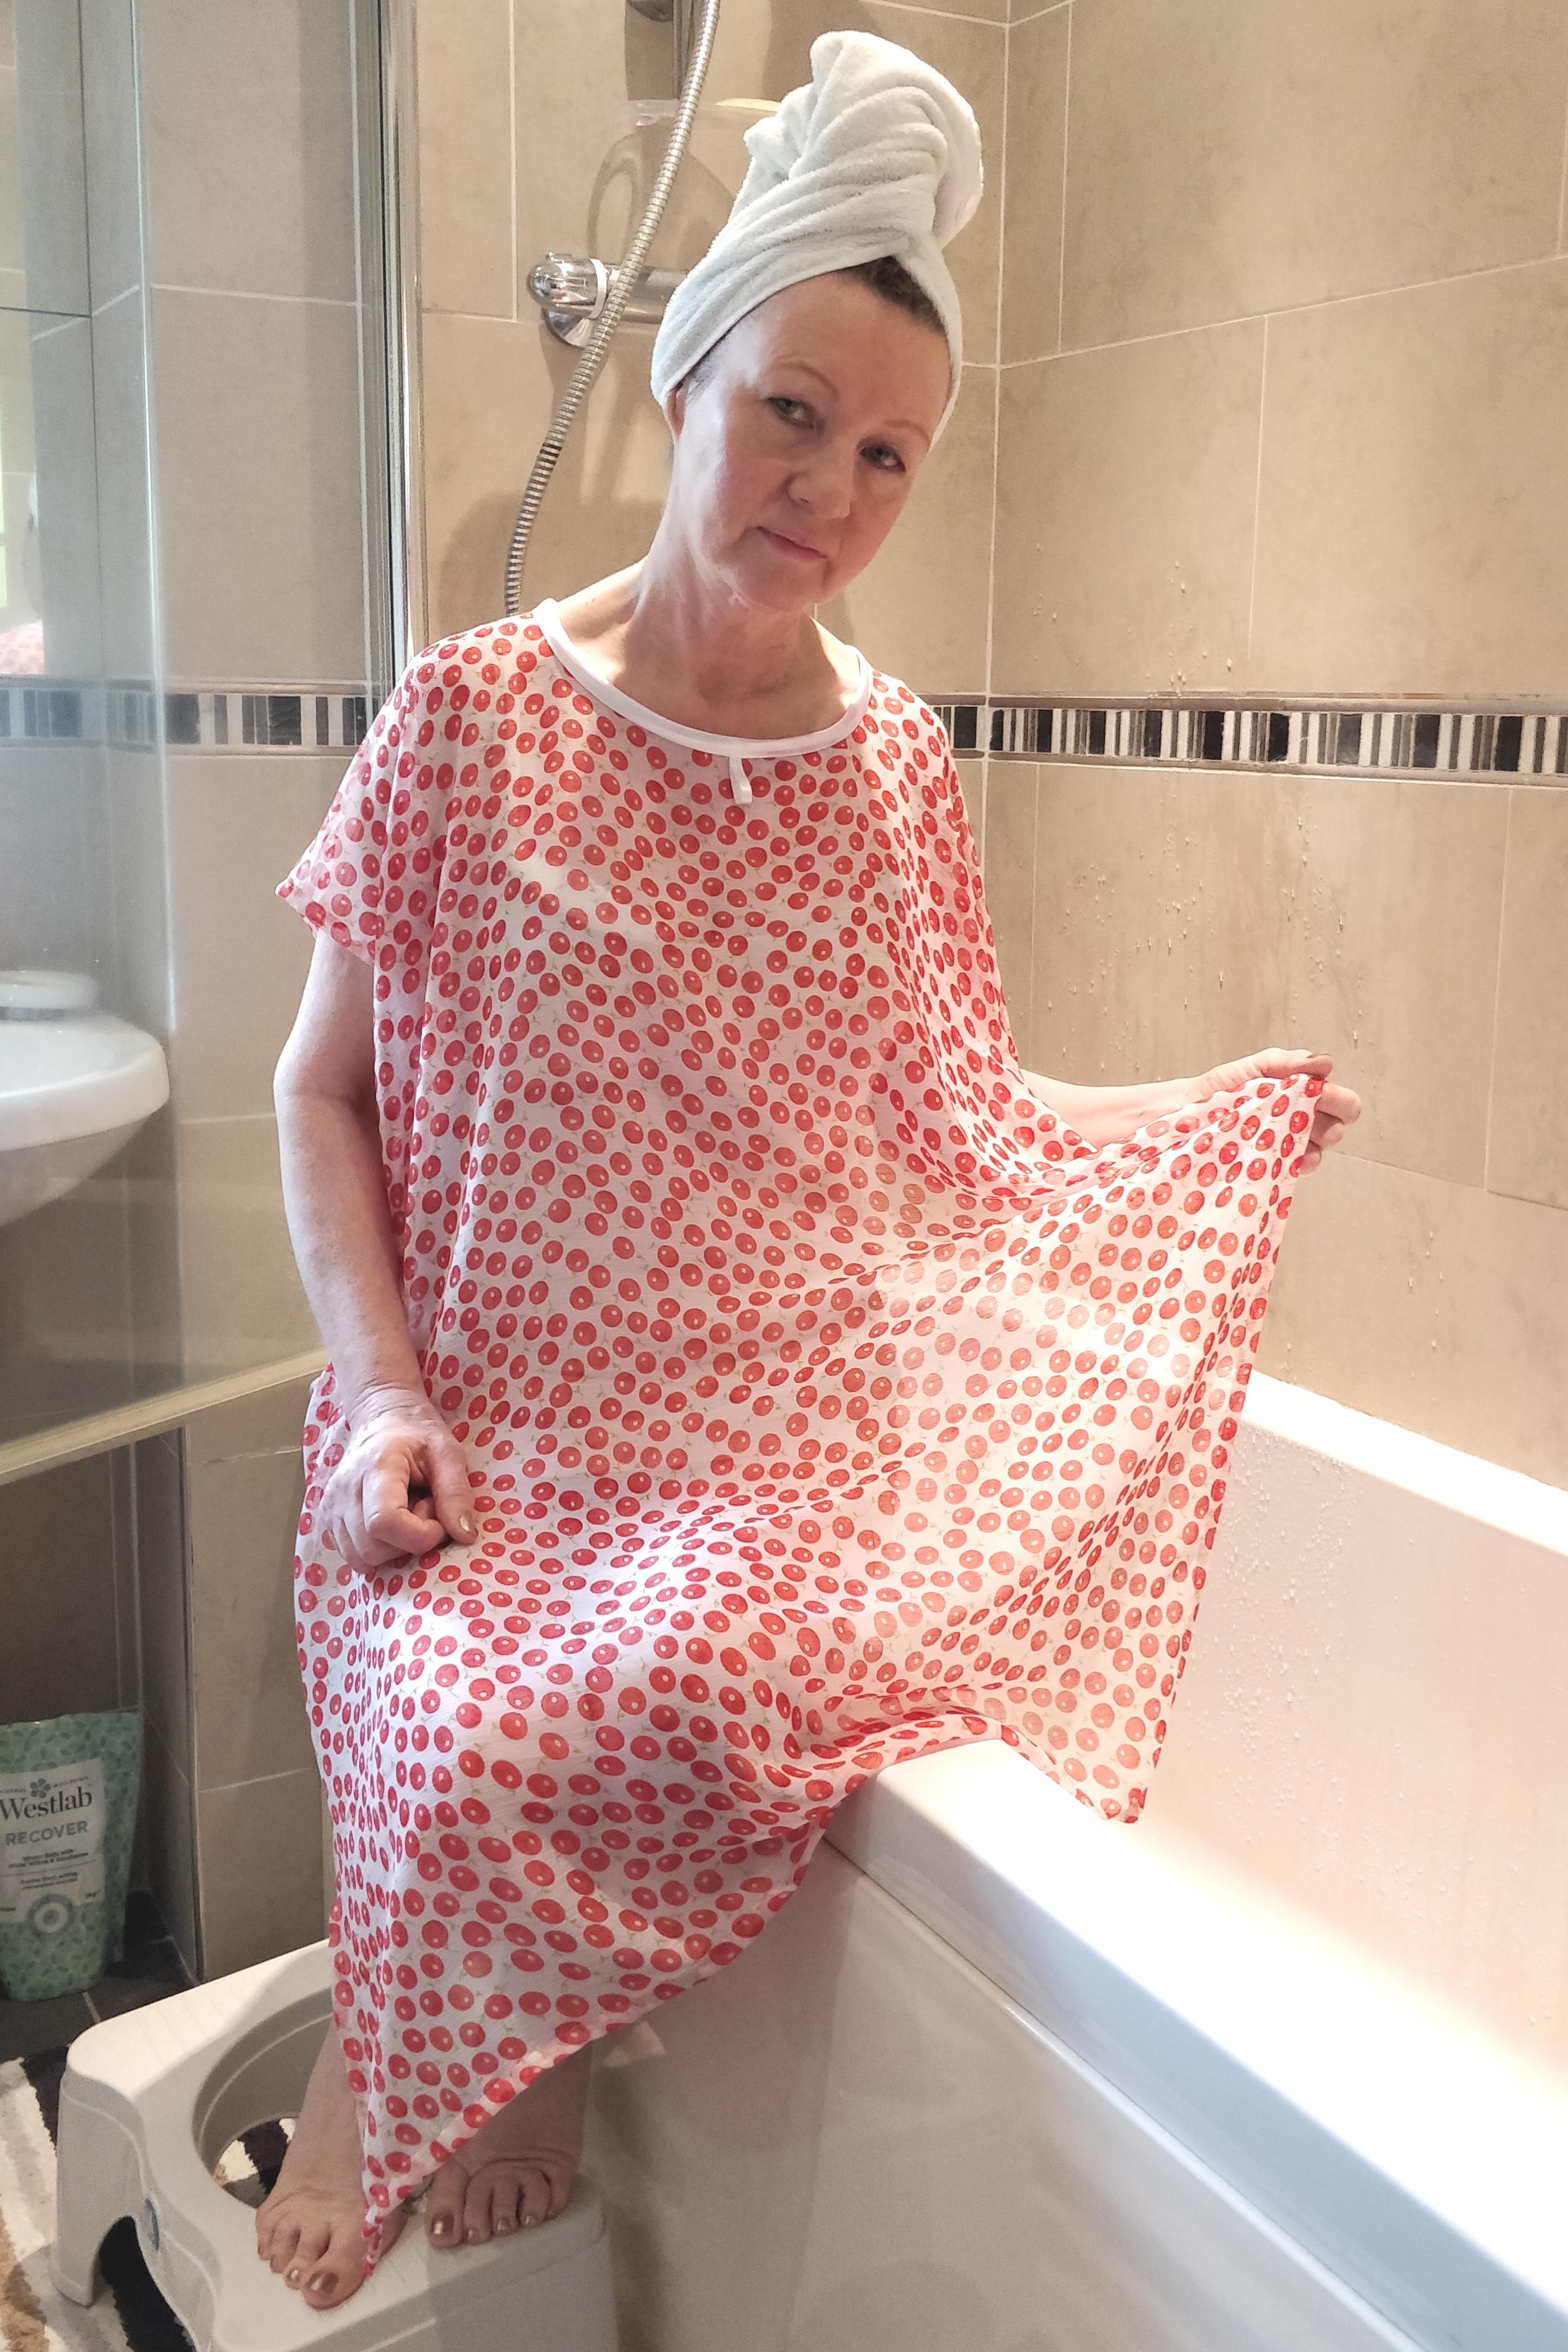 Soft Red NeverNaked(tm) Shower Drapron® to provide modesty, dignity and privacy whilst being helped to shower or bathe. Shower modesty wear. Bathing modesty gown. Lightweight crepe chiffon. Slips over shoulders - No sleeves. Magnetic fastening at back